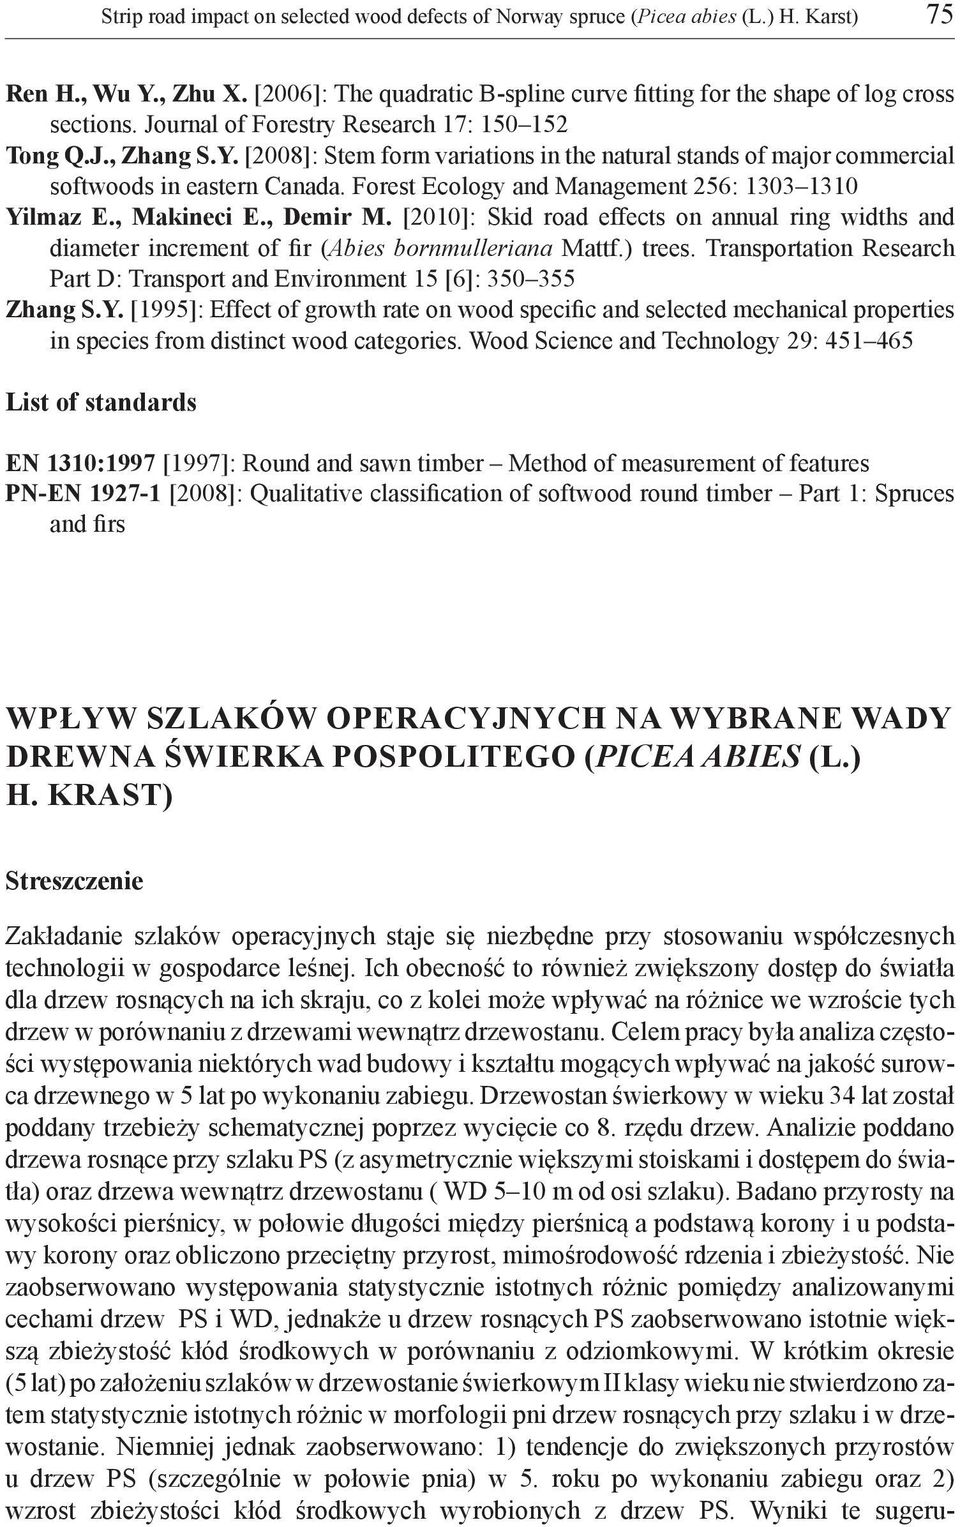 Forest Ecology and Management 256: 1303 1310 Yilmaz E., Makineci E., Demir M. [2010]: Skid road effects on annual ring widths and diameter increment of fir (Abies bornmulleriana Mattf.) trees.